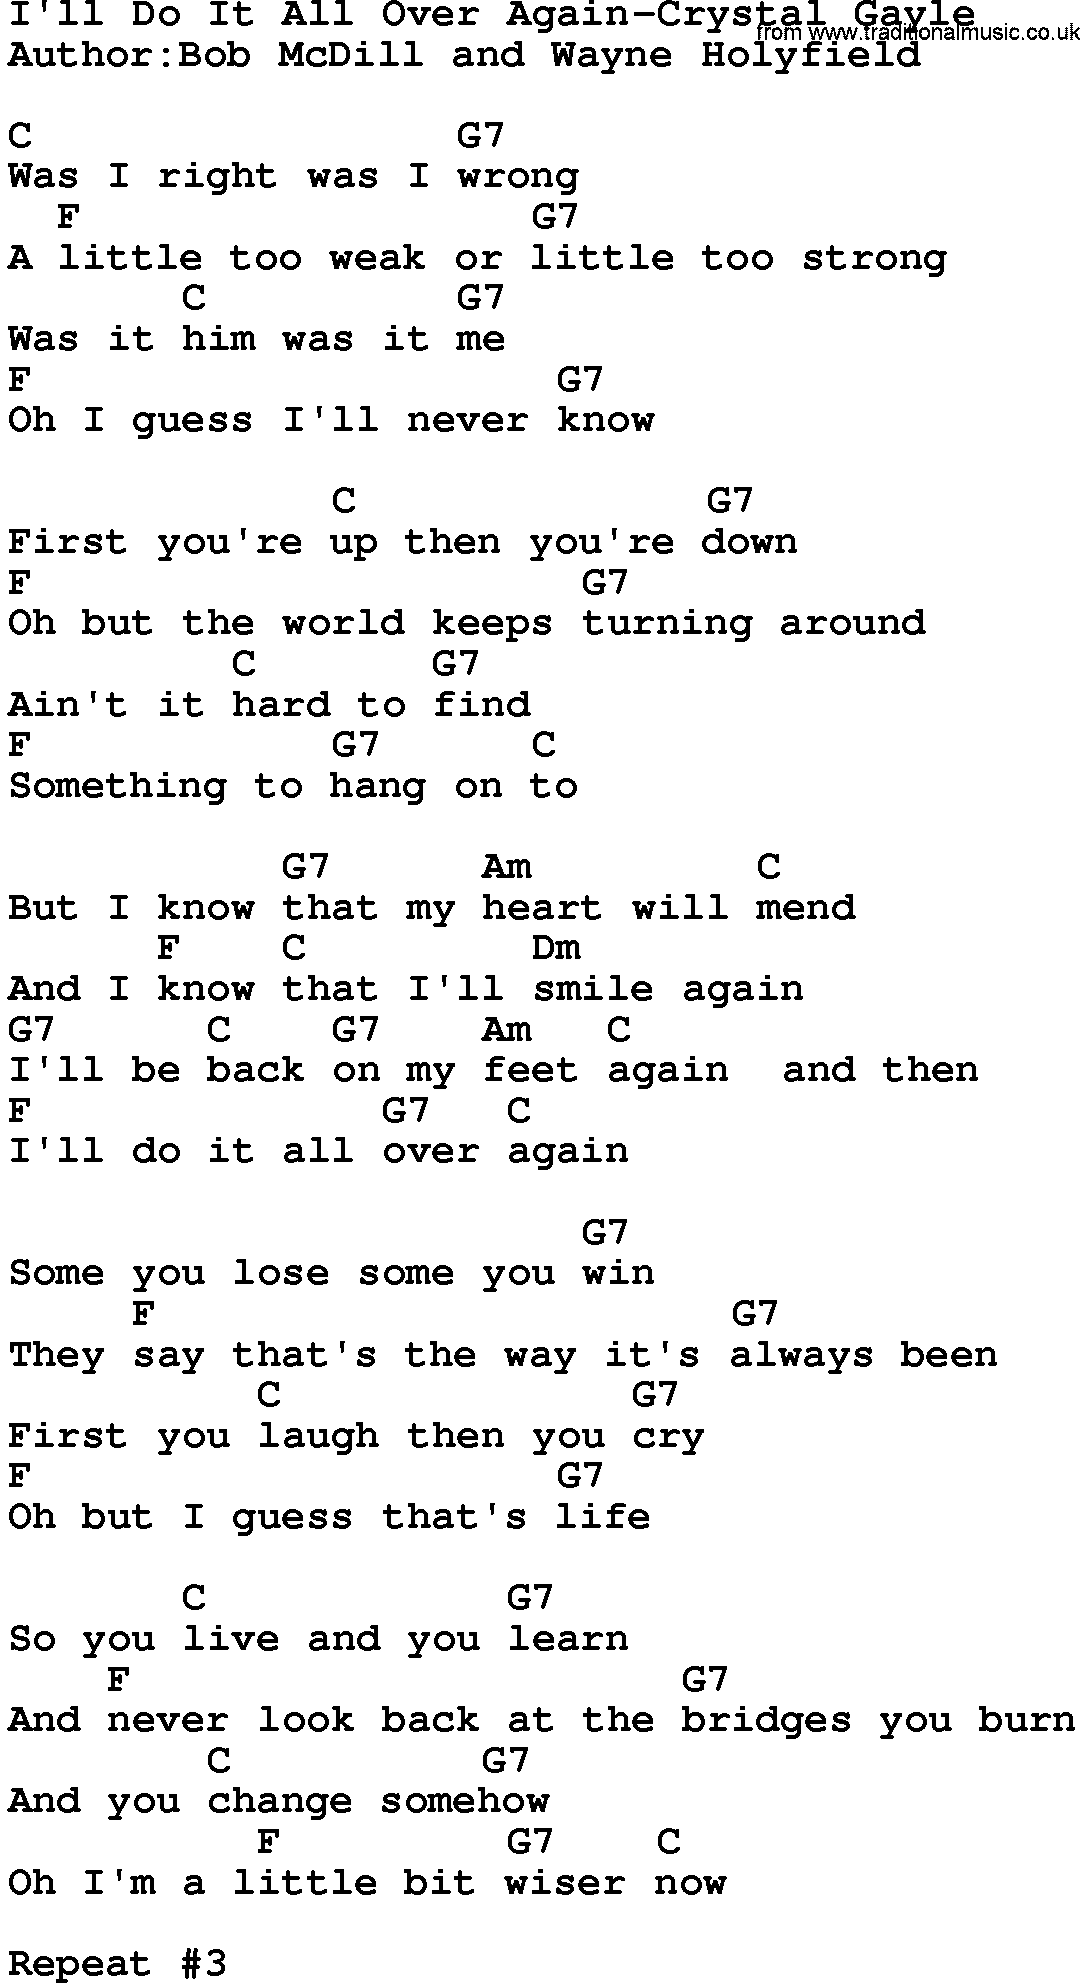 Country Music:I'll Do It All Over Again-Crystal Gayle Lyrics and Chords - Do It Do It Song